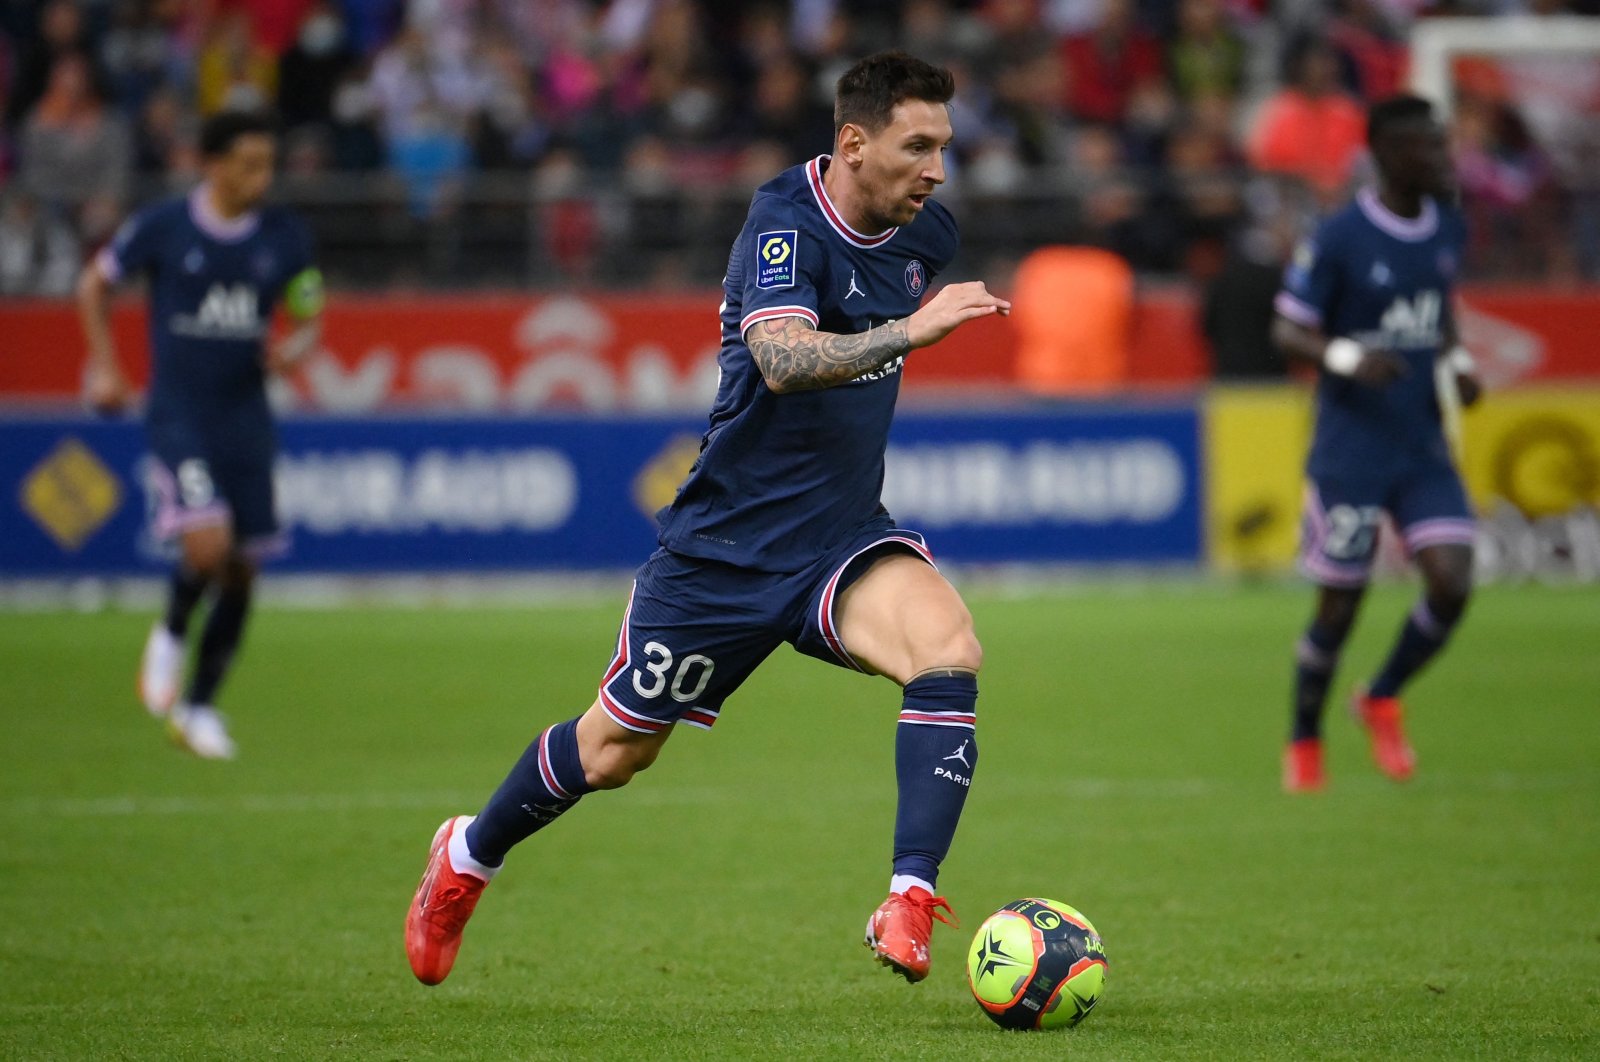 PSG's Lionel Messi runs with the ball during the French L1 match against Stade de Reims, northern France, Aug. 29, 2021. (AFP Photo)